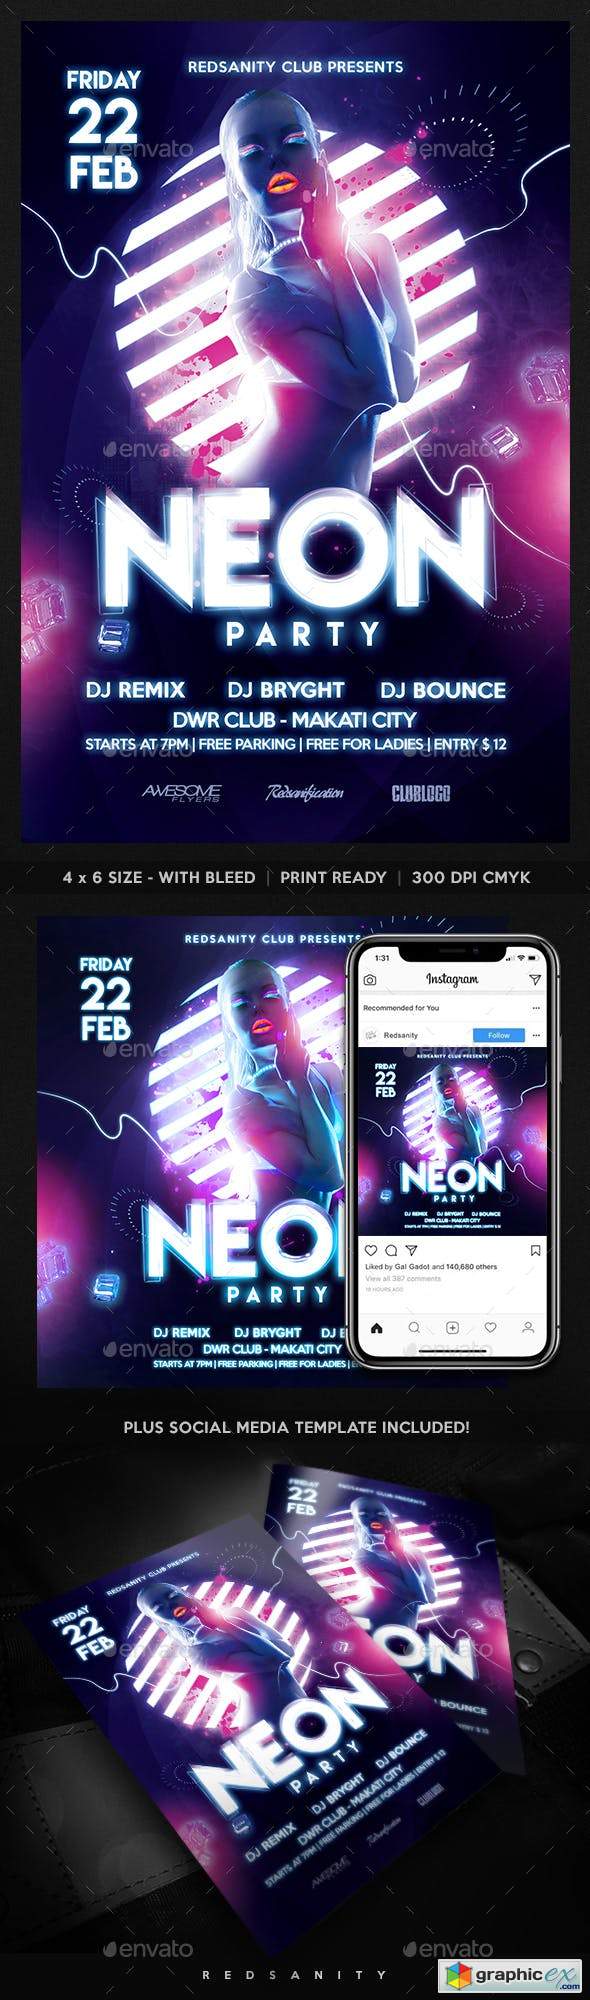 Neon Party Flyer 23113805